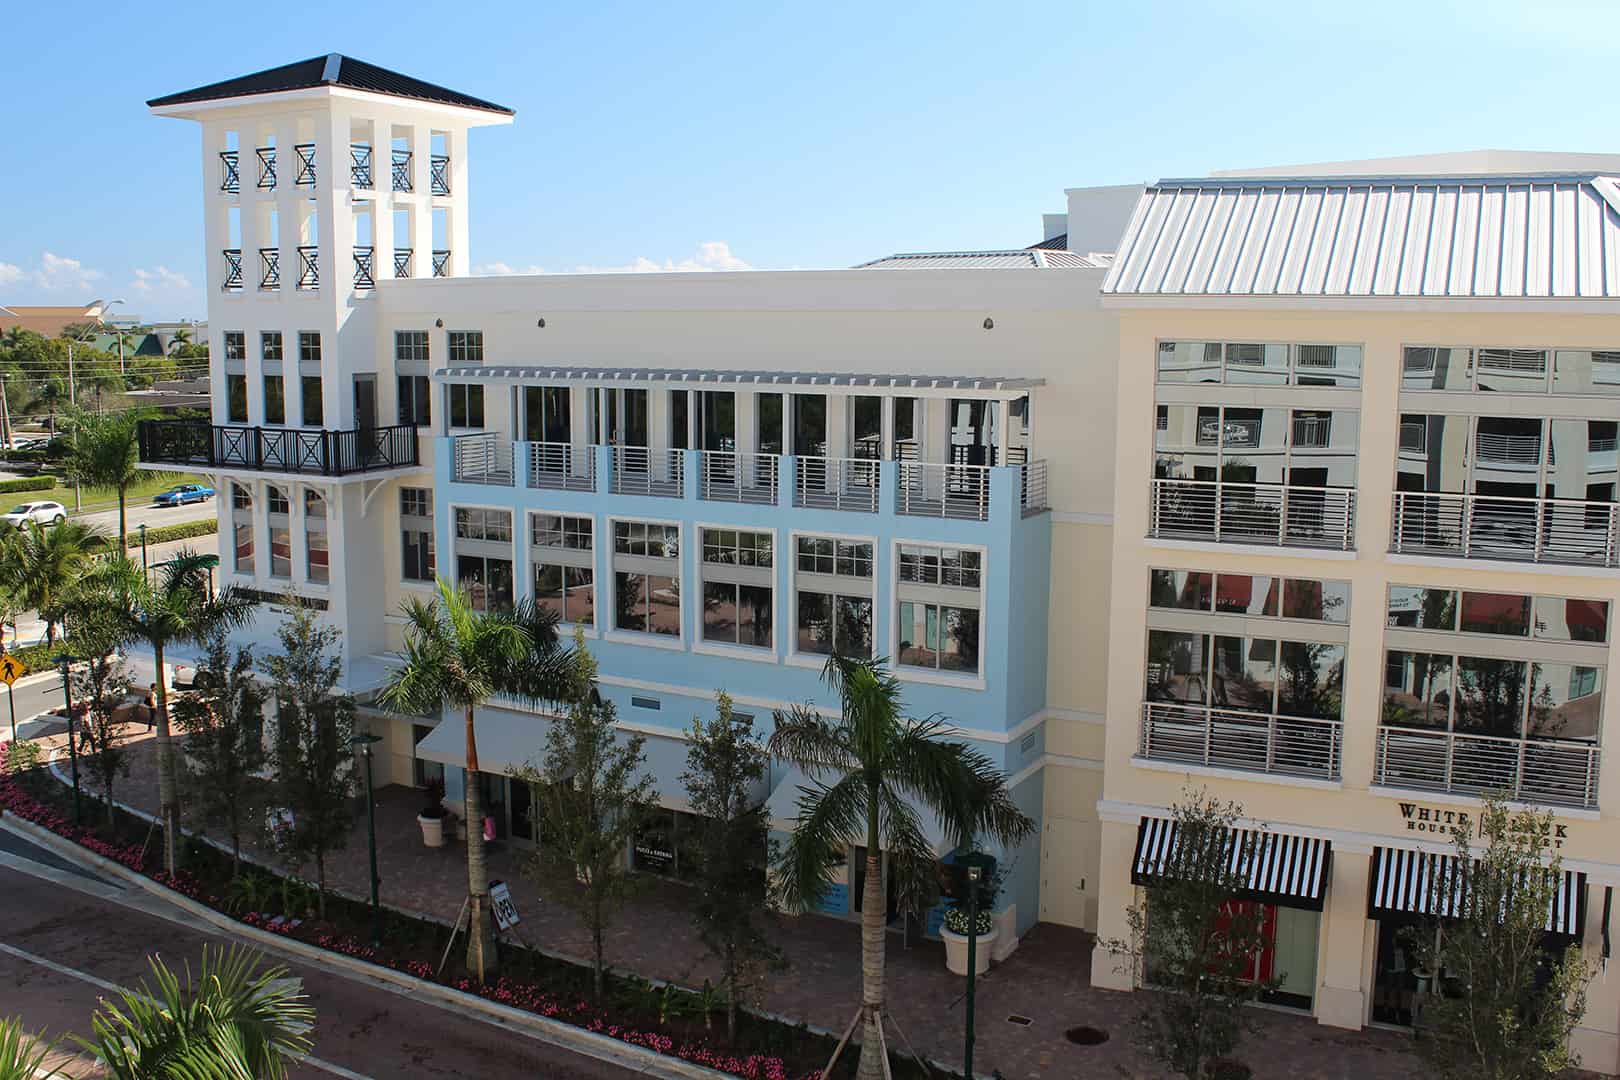 Multi-level beige storefront with blue accent wall, SMI-175 Impact Storefront System with Summit Impact Doors by Aldora, front-set impact windows and doors open to balconies on higher floors, tall white overlook on far left of building, palm trees line street